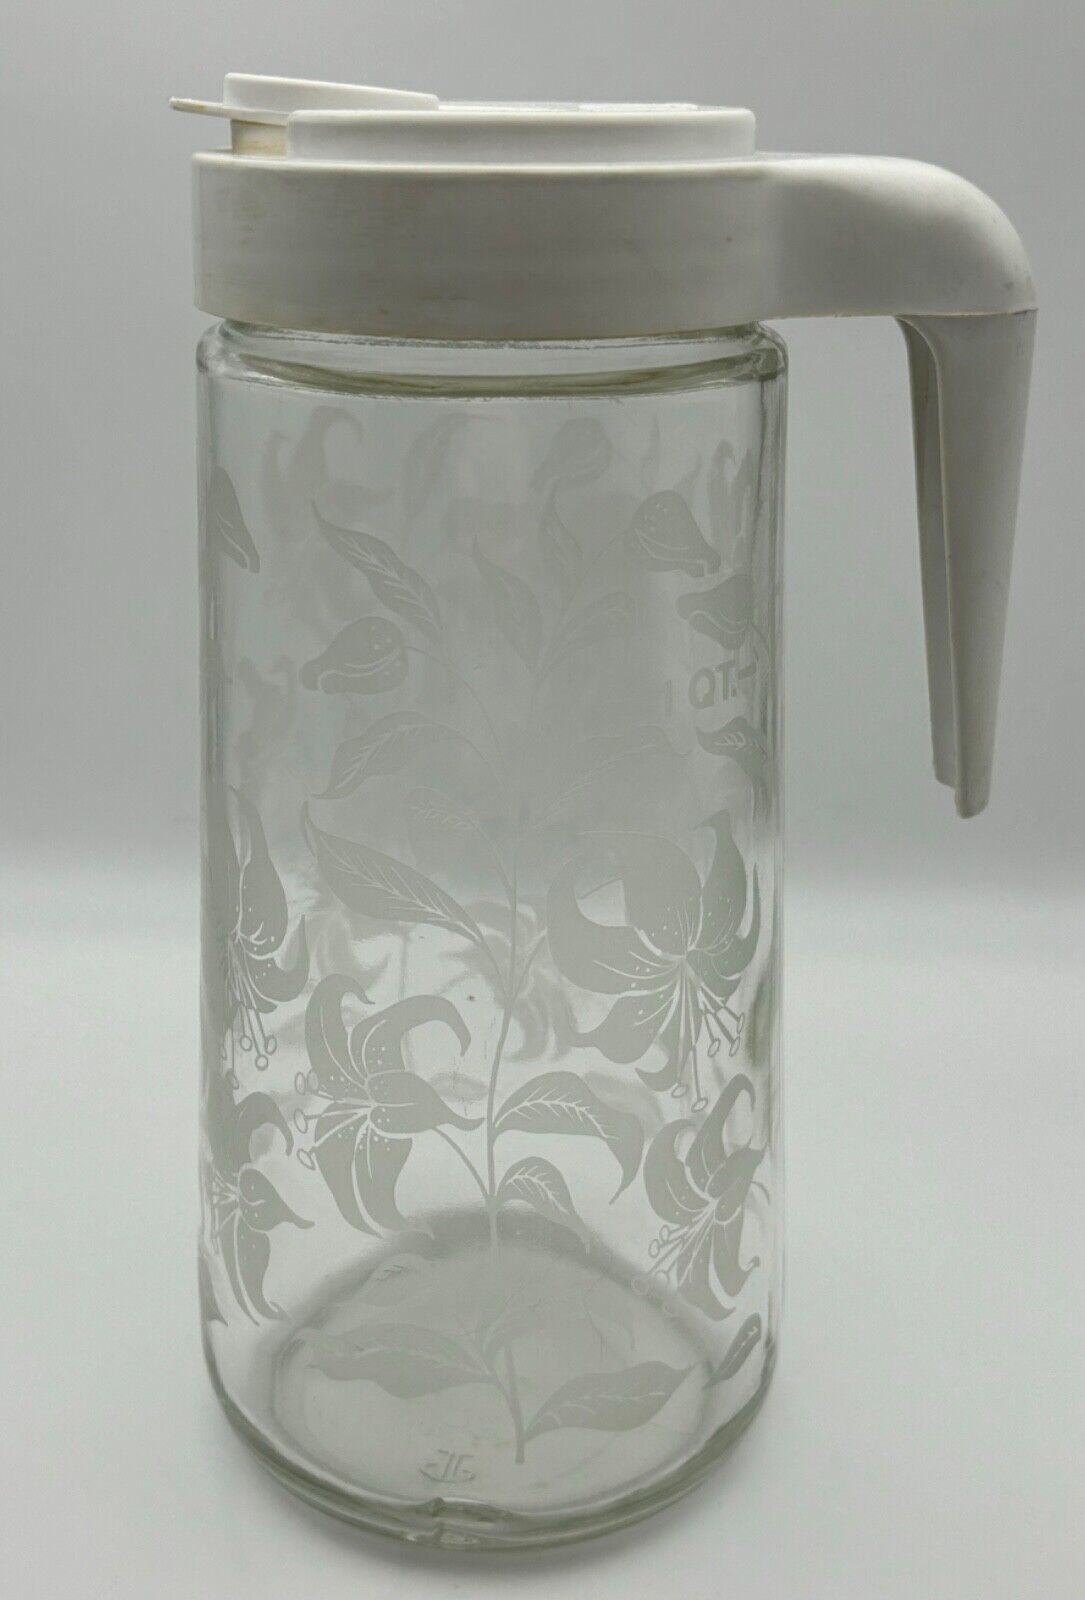 Vintage 1 Quart Tang Glass Pitcher Lid White Lily Etched Carafe 1970s